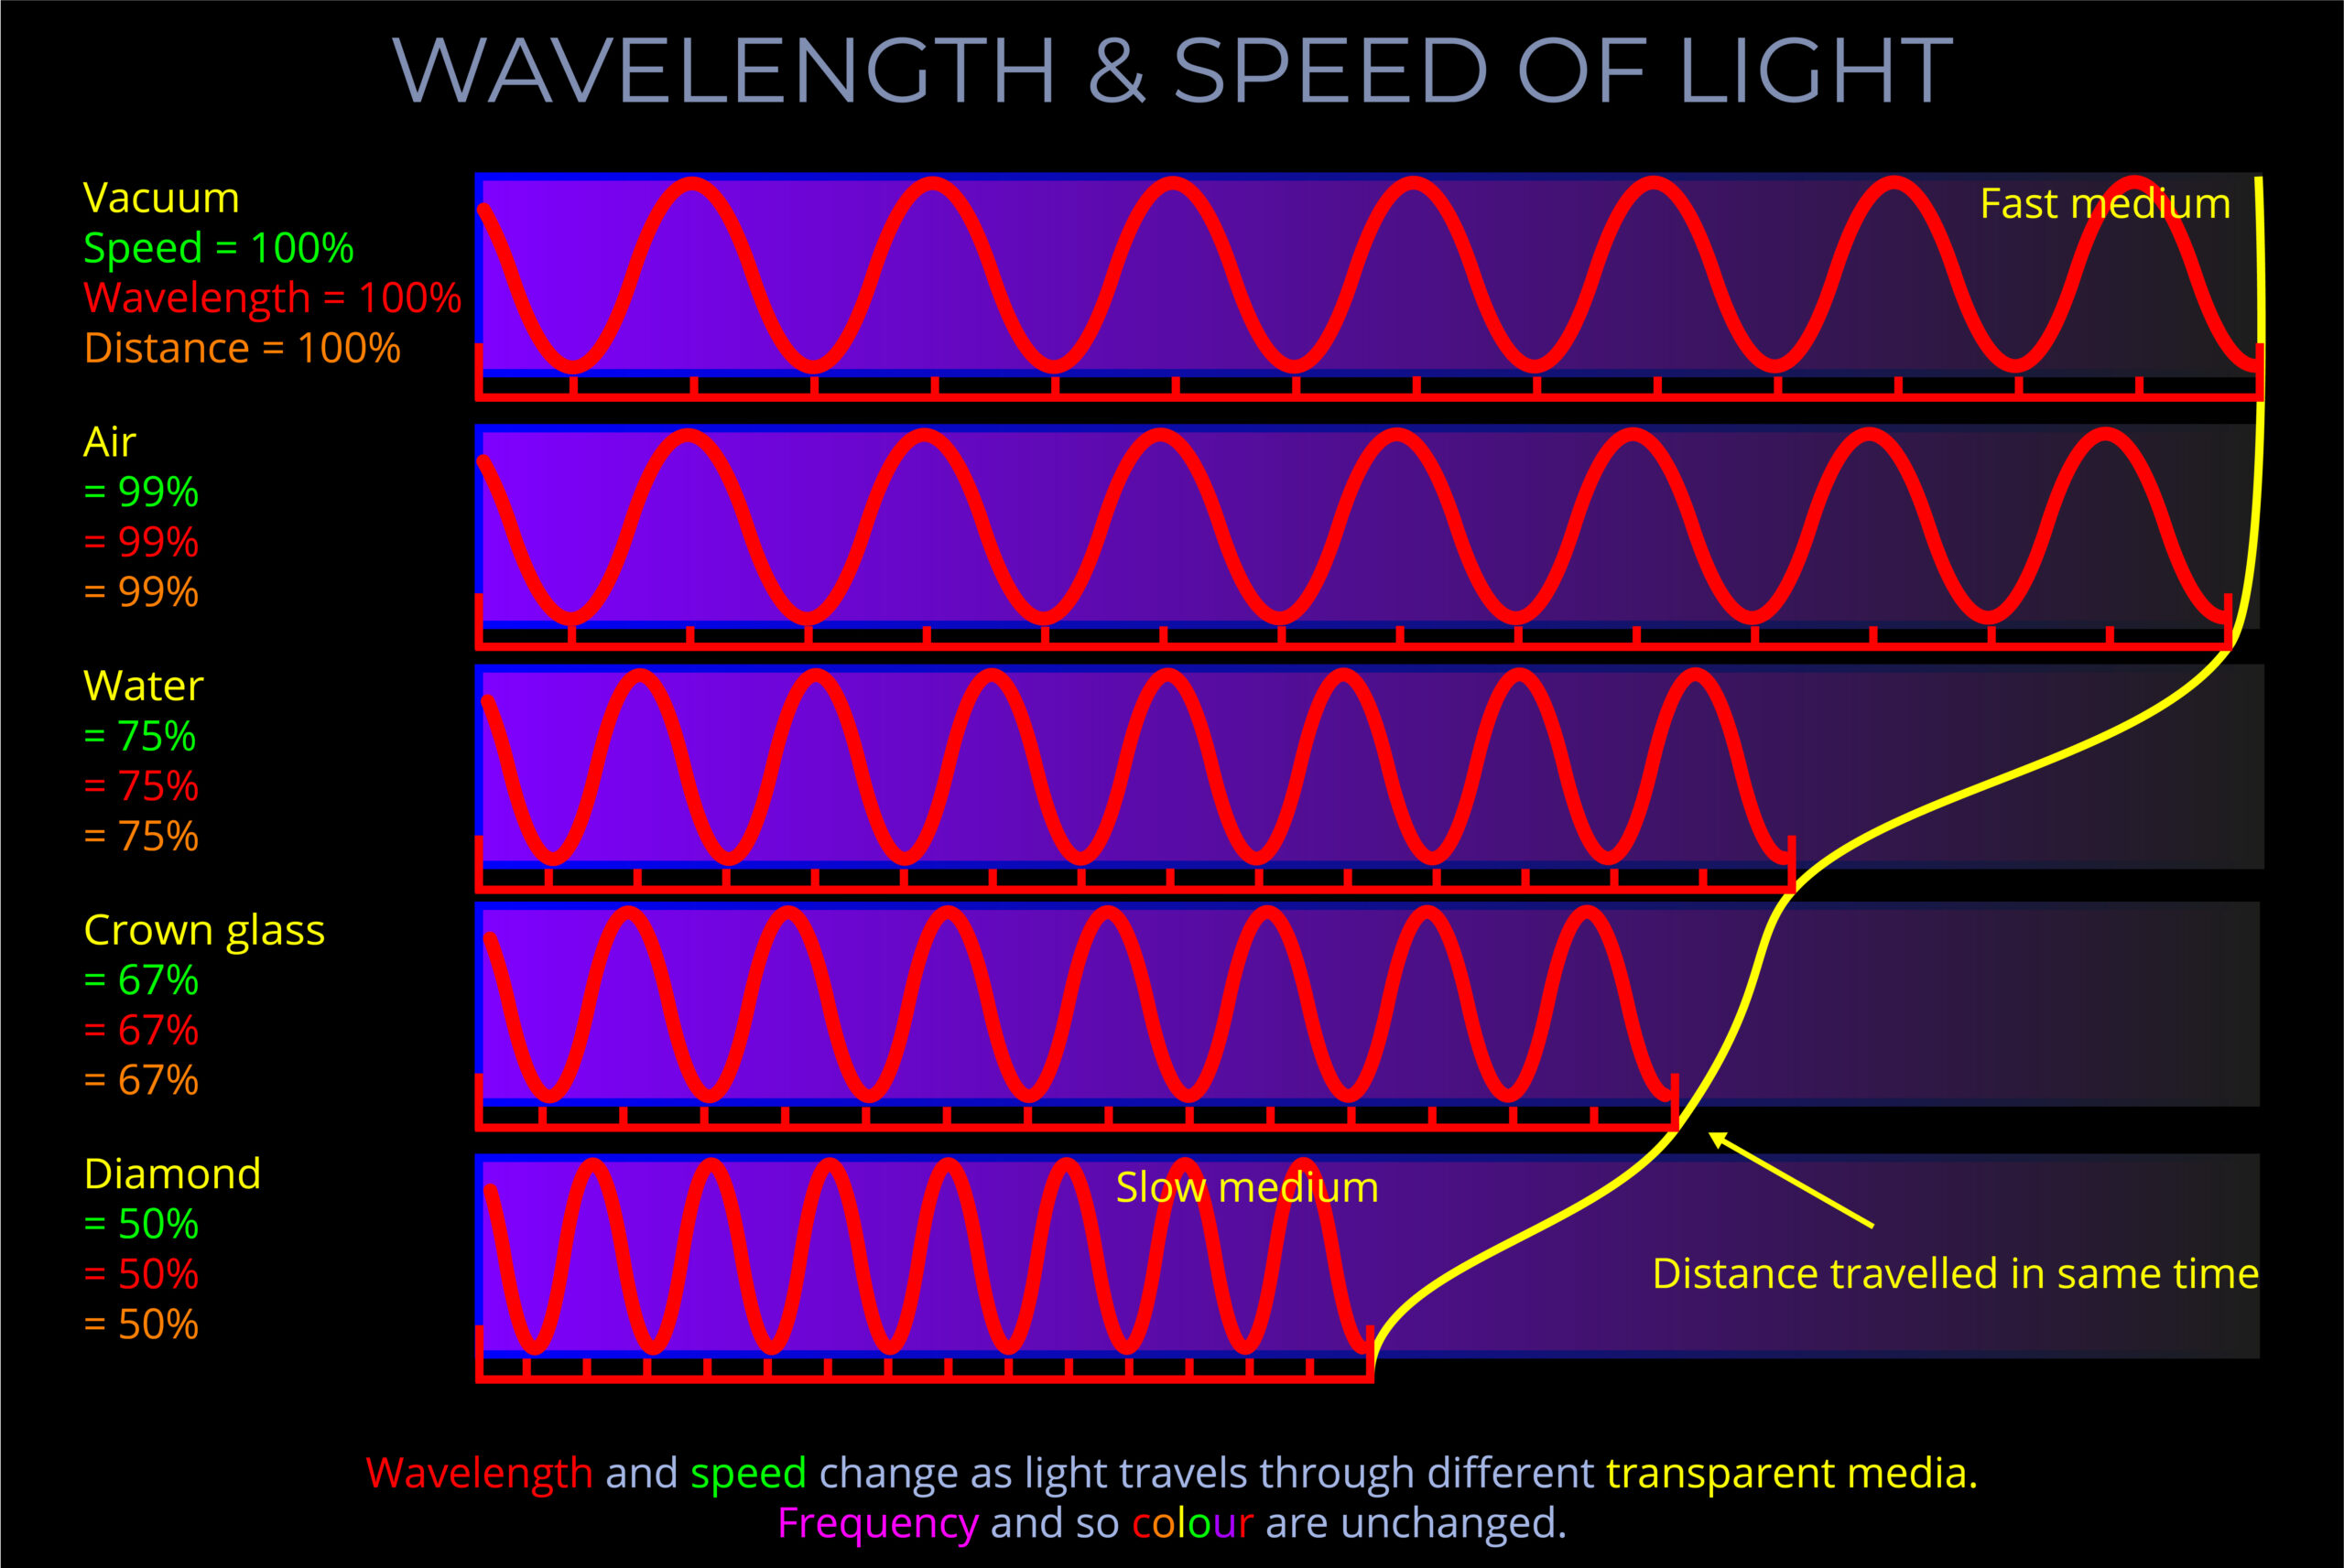 What is the speed of light?